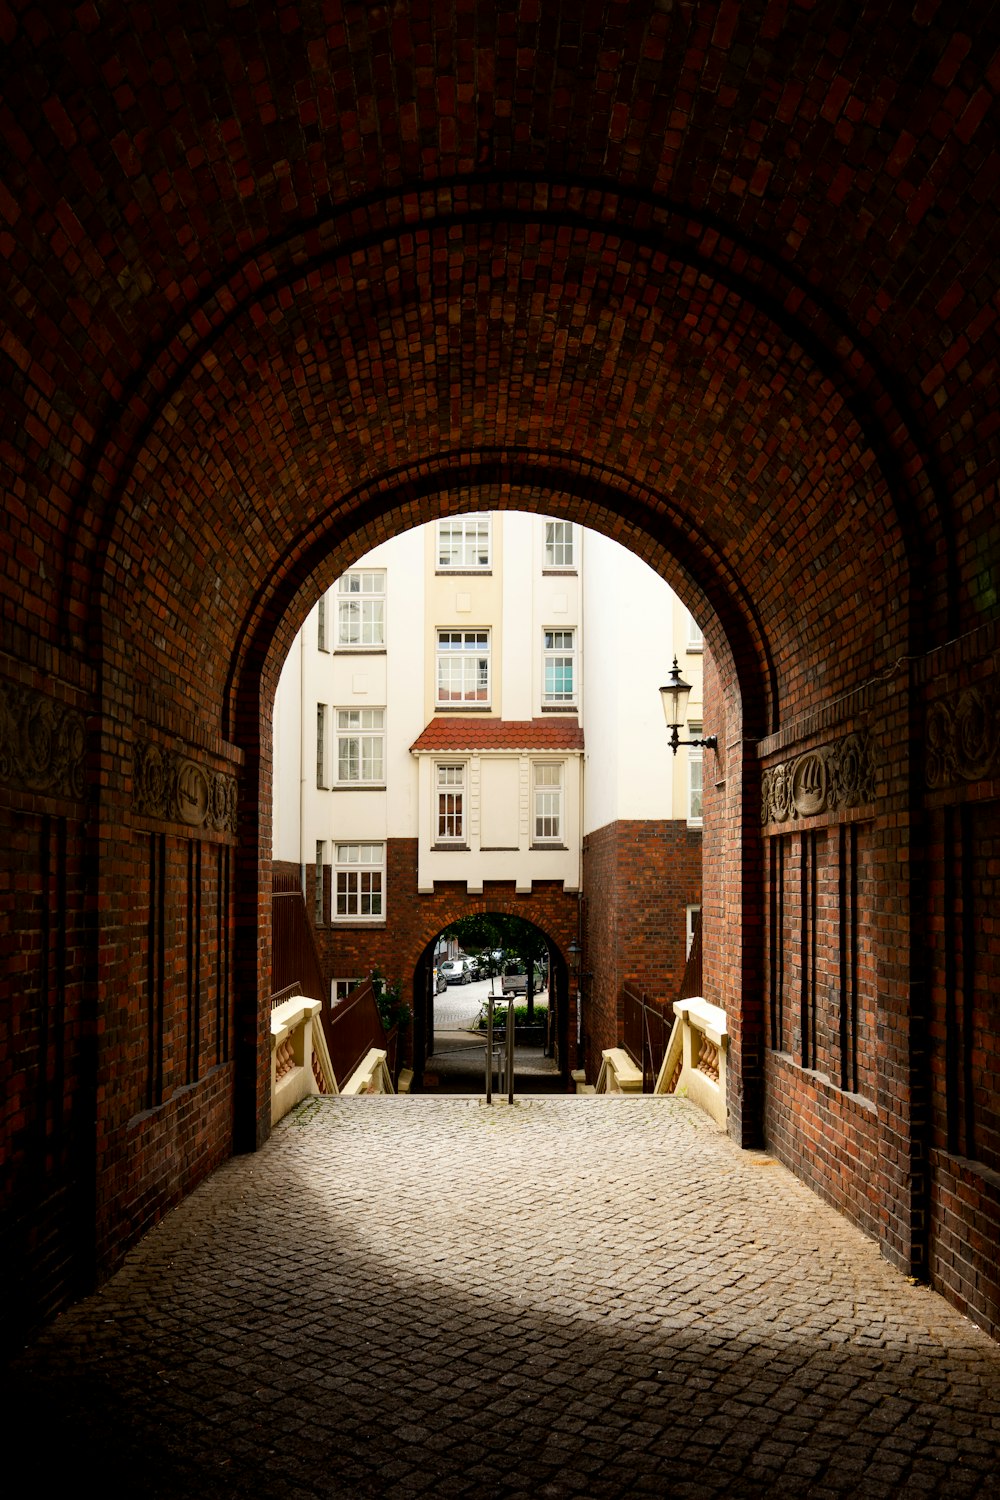 an archway leading to a building with a clock on it